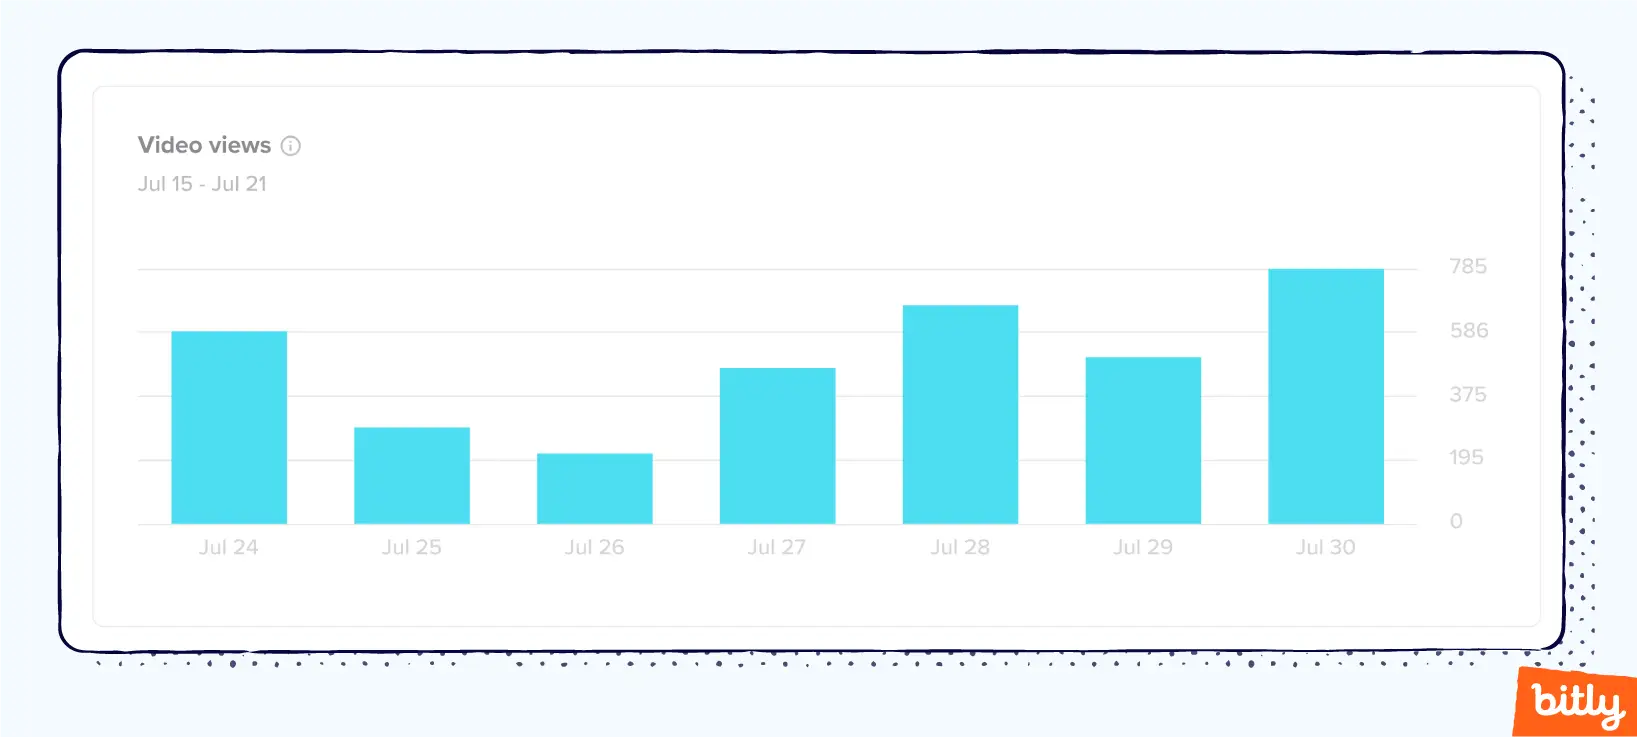 A bar graph showing the number of video views each day over the course of a week.